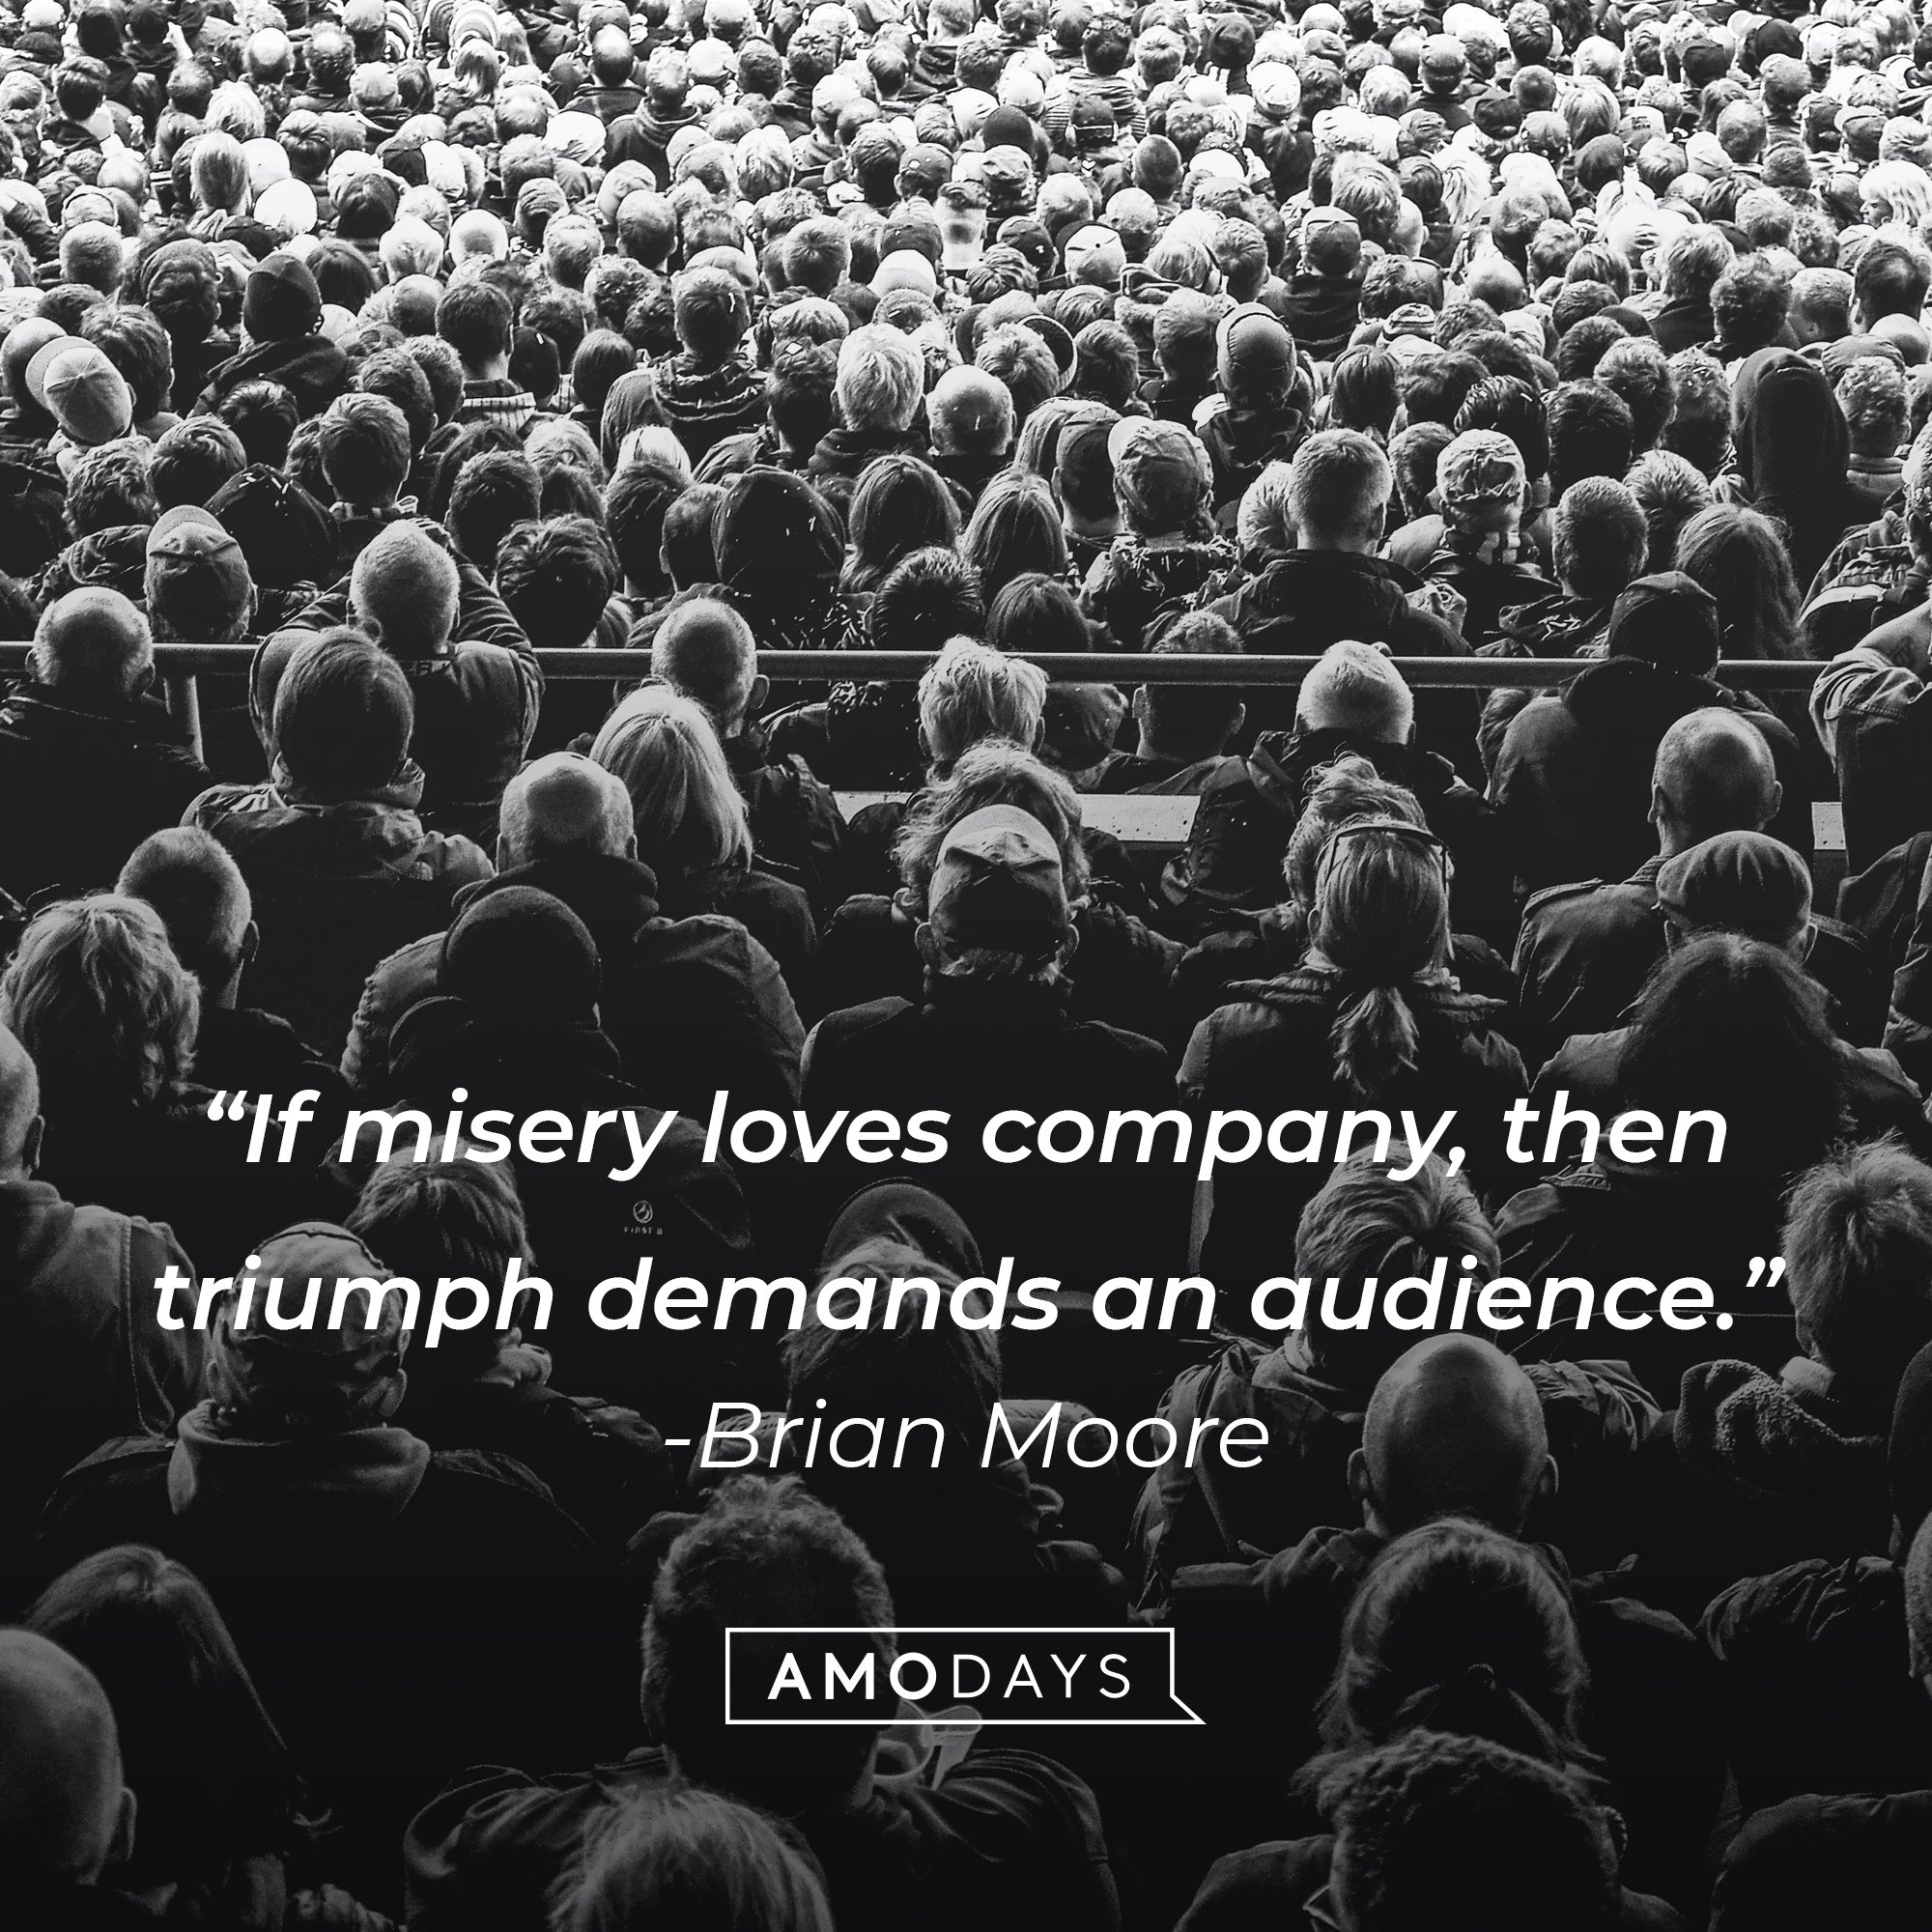 Brian Moore’s quote: "If misery loves company, then triumph demands an audience." | Image: AmoDays